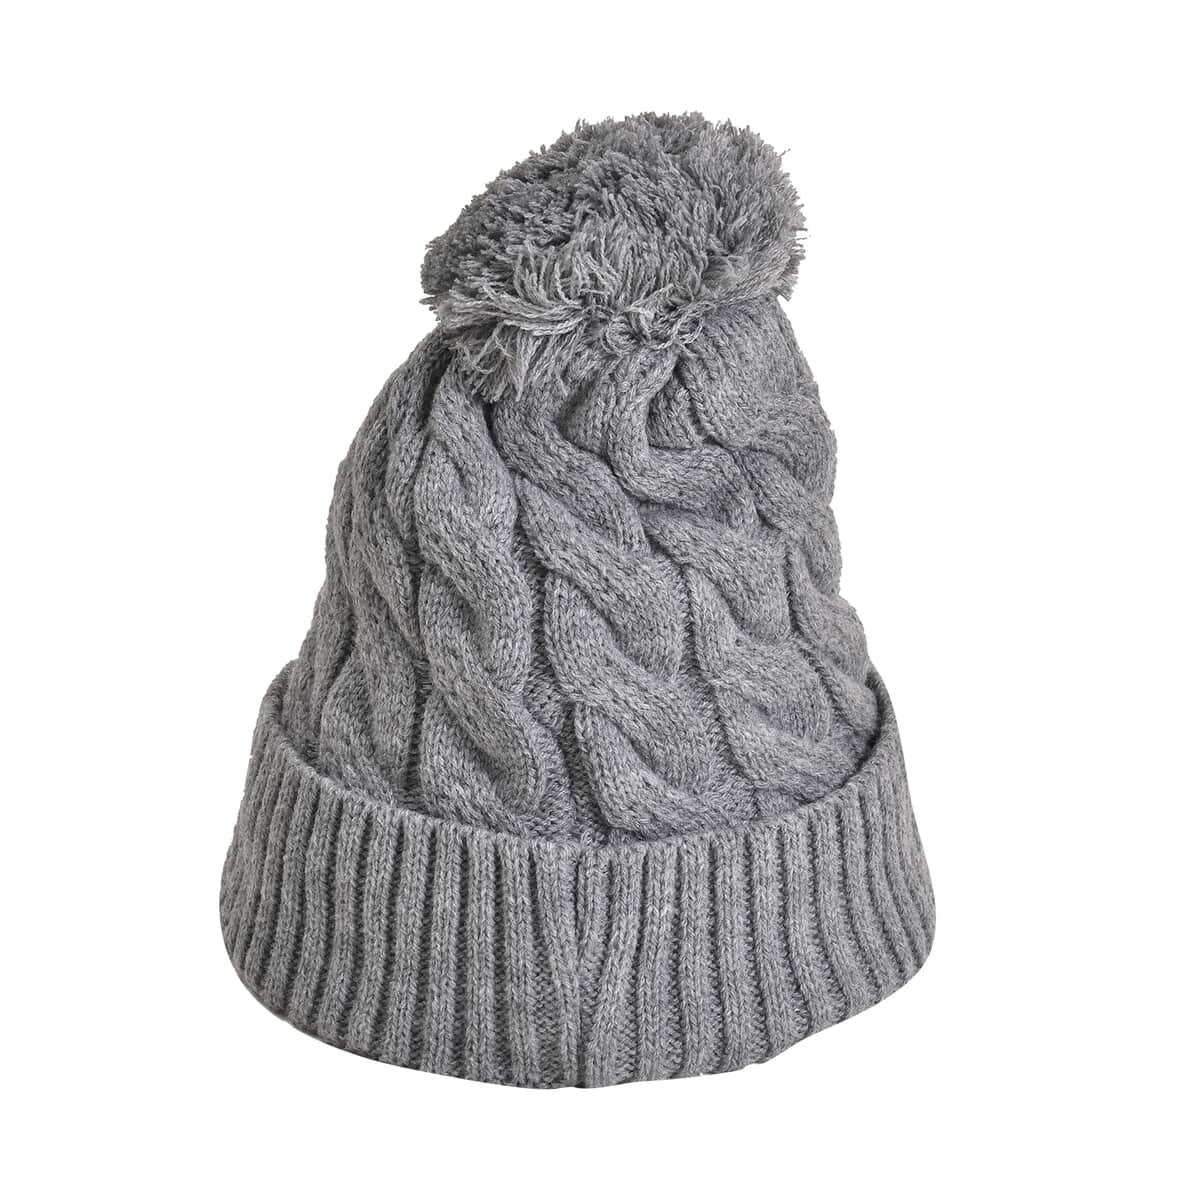 USB Rechargeable Waterproof LED Lighted Beanie Cap with Sherpa Lining and with Faux fur Bubble - Gray image number 4